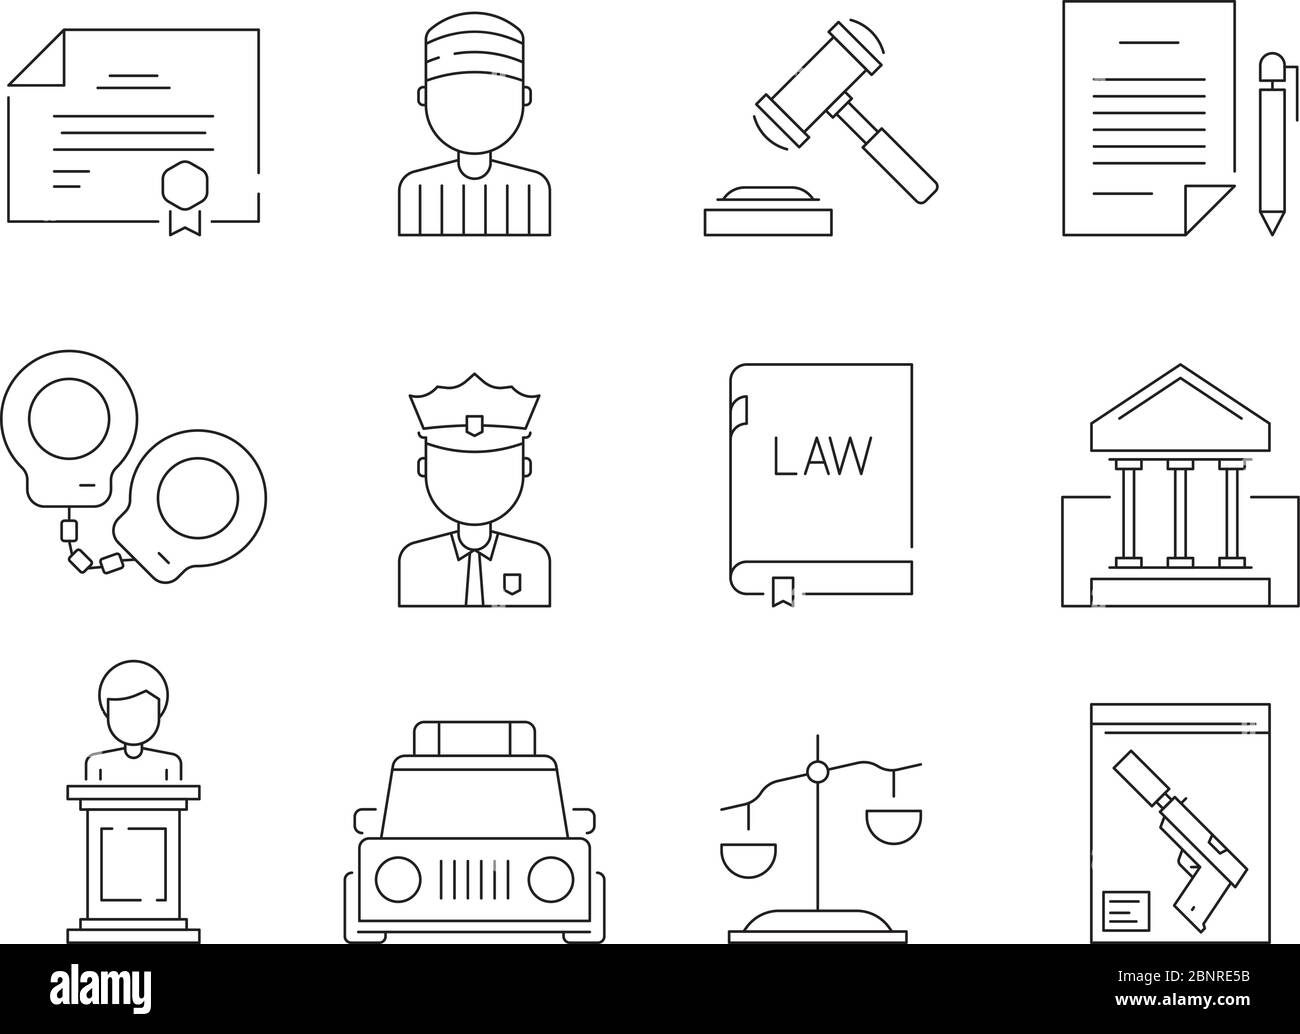 Law thin icon. Legal lawyer criminal judgement sheriff and police justice punishment vector symbols isolated Stock Vector